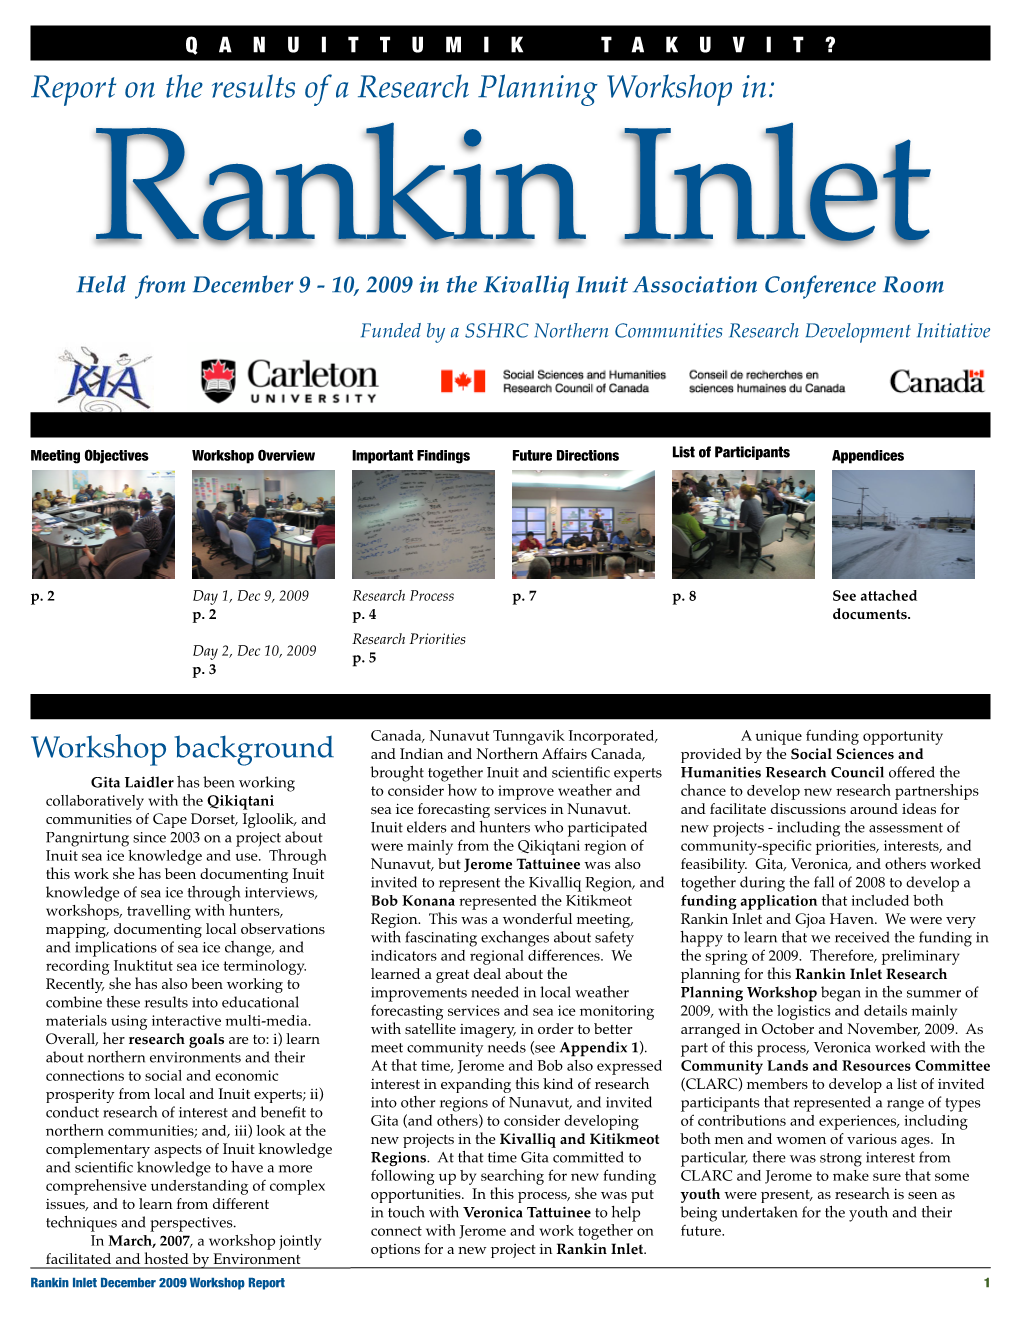 Report on the Results of a Research Planning Workshop In: Rankin Inlet Held from December 9 - 10, 2009 in the Kivalliq Inuit Association Conference Room